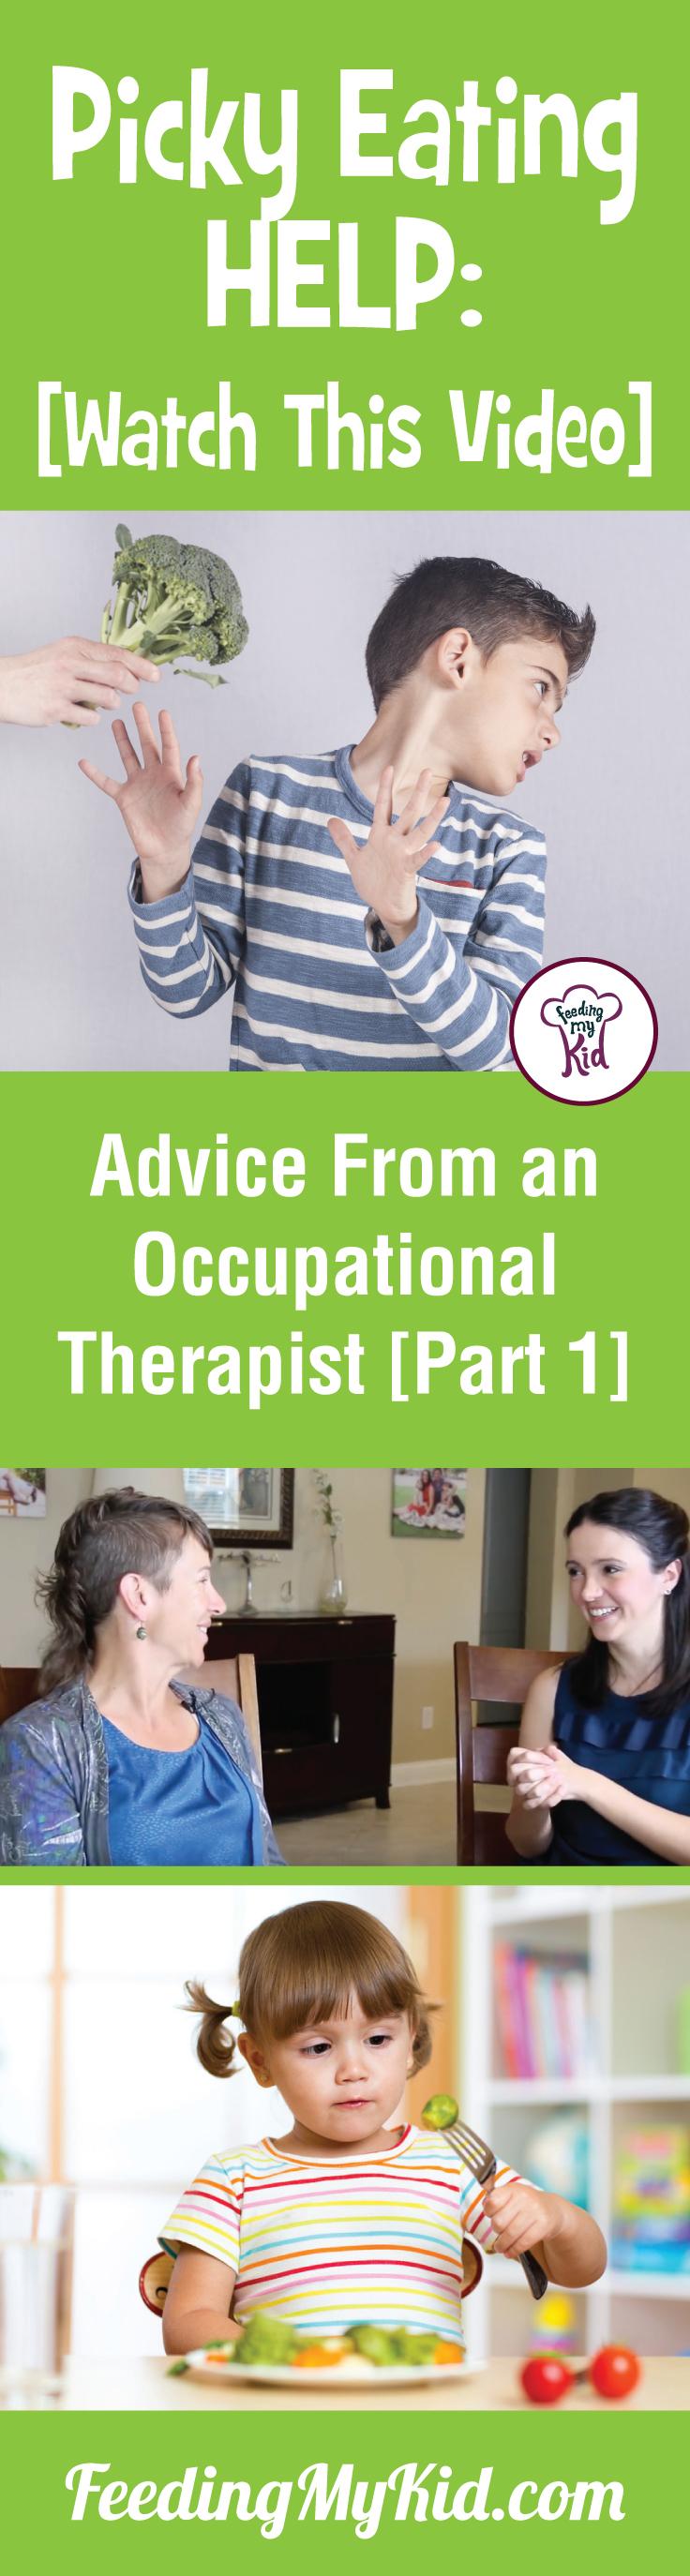 A conversation with an occupational therapist. Learn everything you need to know about occupational therapy for children. Feeding My Kid is a filled with all the information you need about how to raise your kids, from healthy tips to nutritious recipes. #FeedingMyKid #OccupationalTherapist #advice #kidshealth